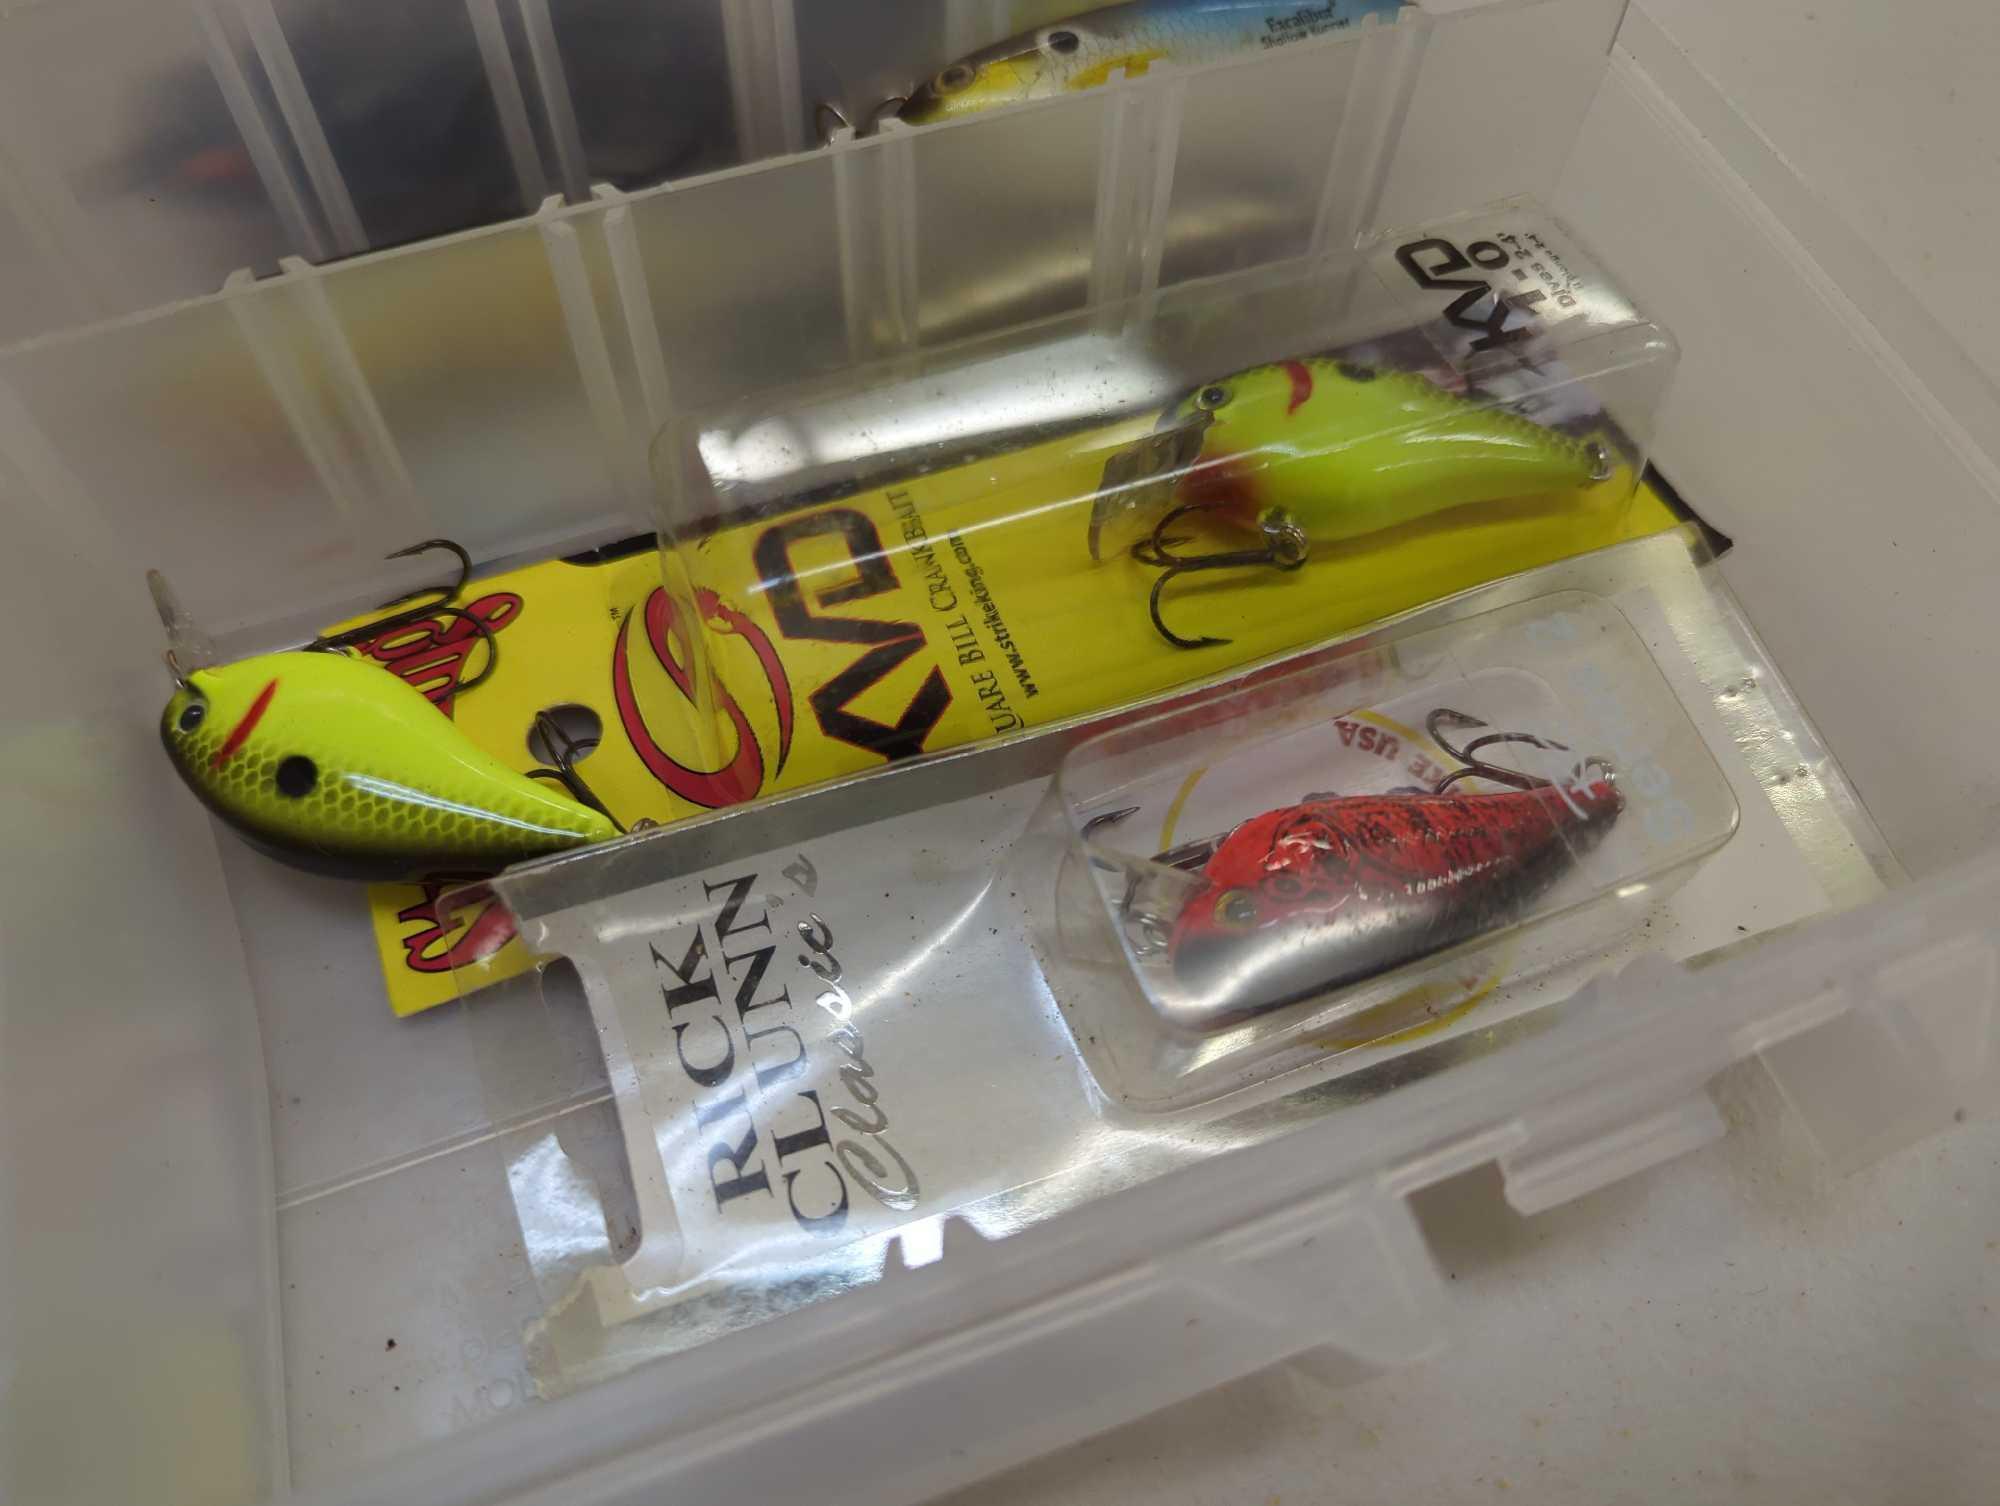 Tackle box and contents including various fishing. Lures. Comes as is shown in photos. Appears to be